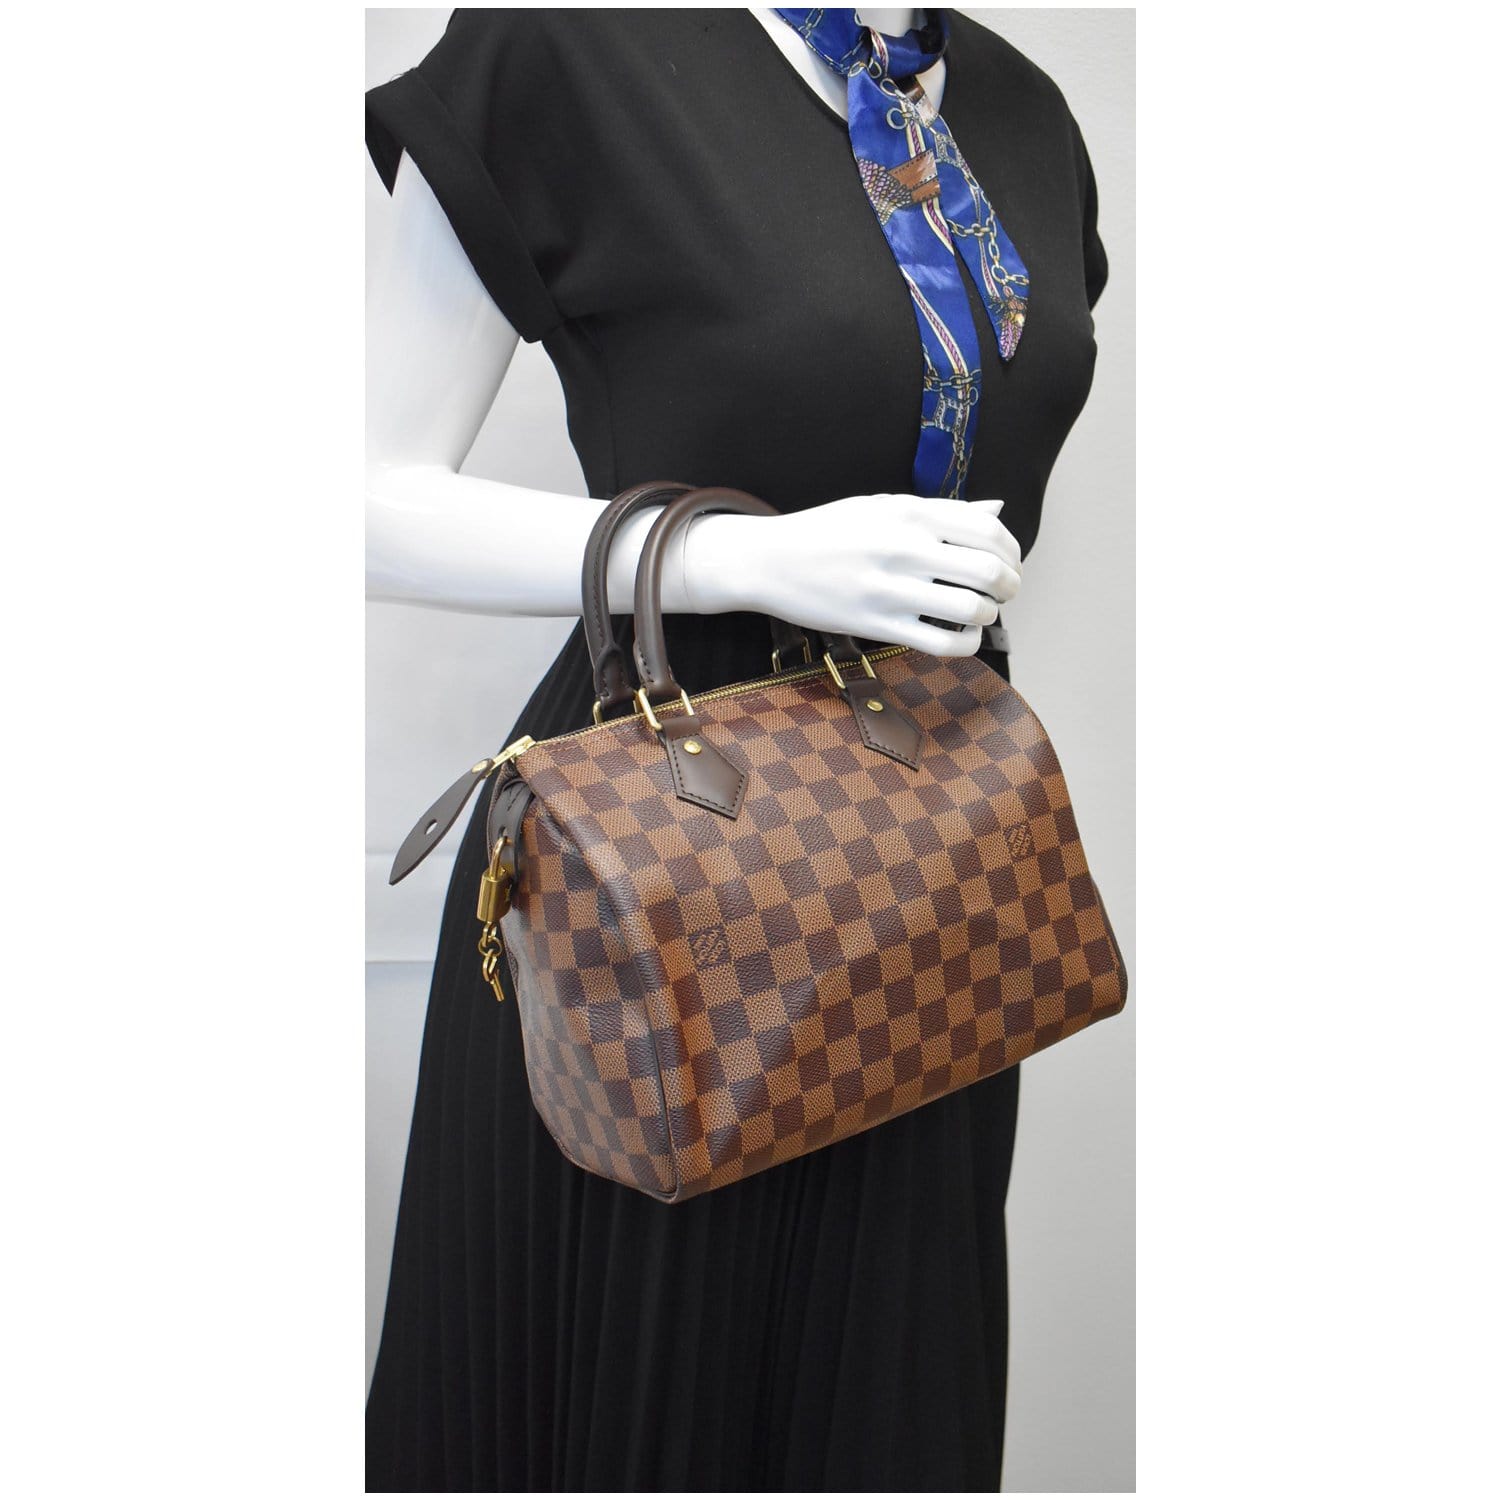 Louis Vuitton, Bags, Authentic Lv Speedy 25 982 With Lock 214